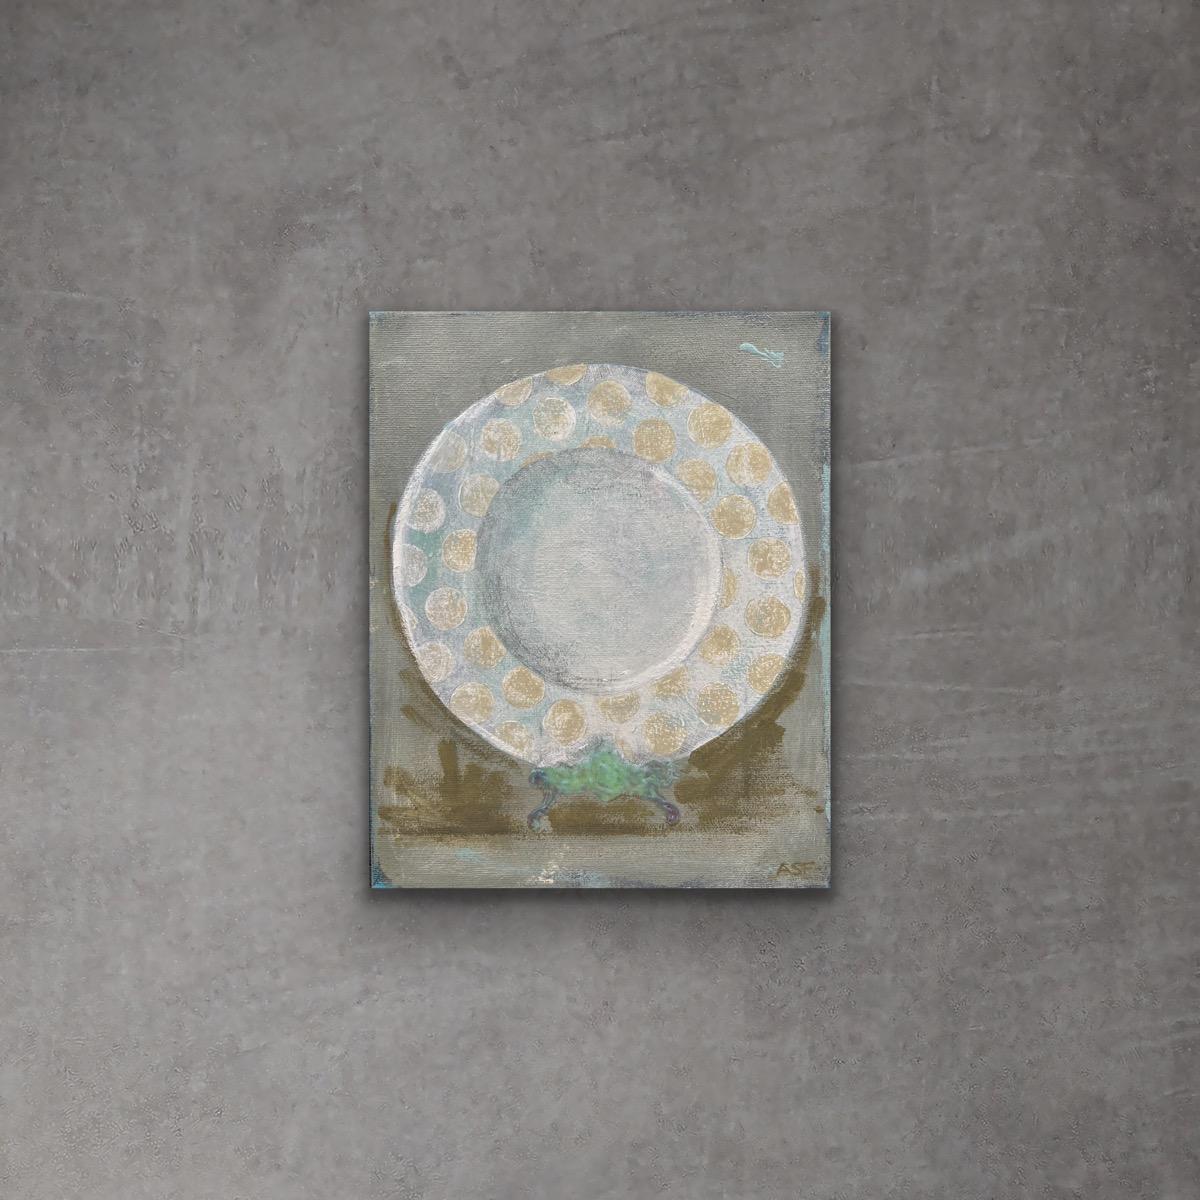 Dinner Plate 2 - 8"x10", Still Life Painting, Muted Green, White, Beige 